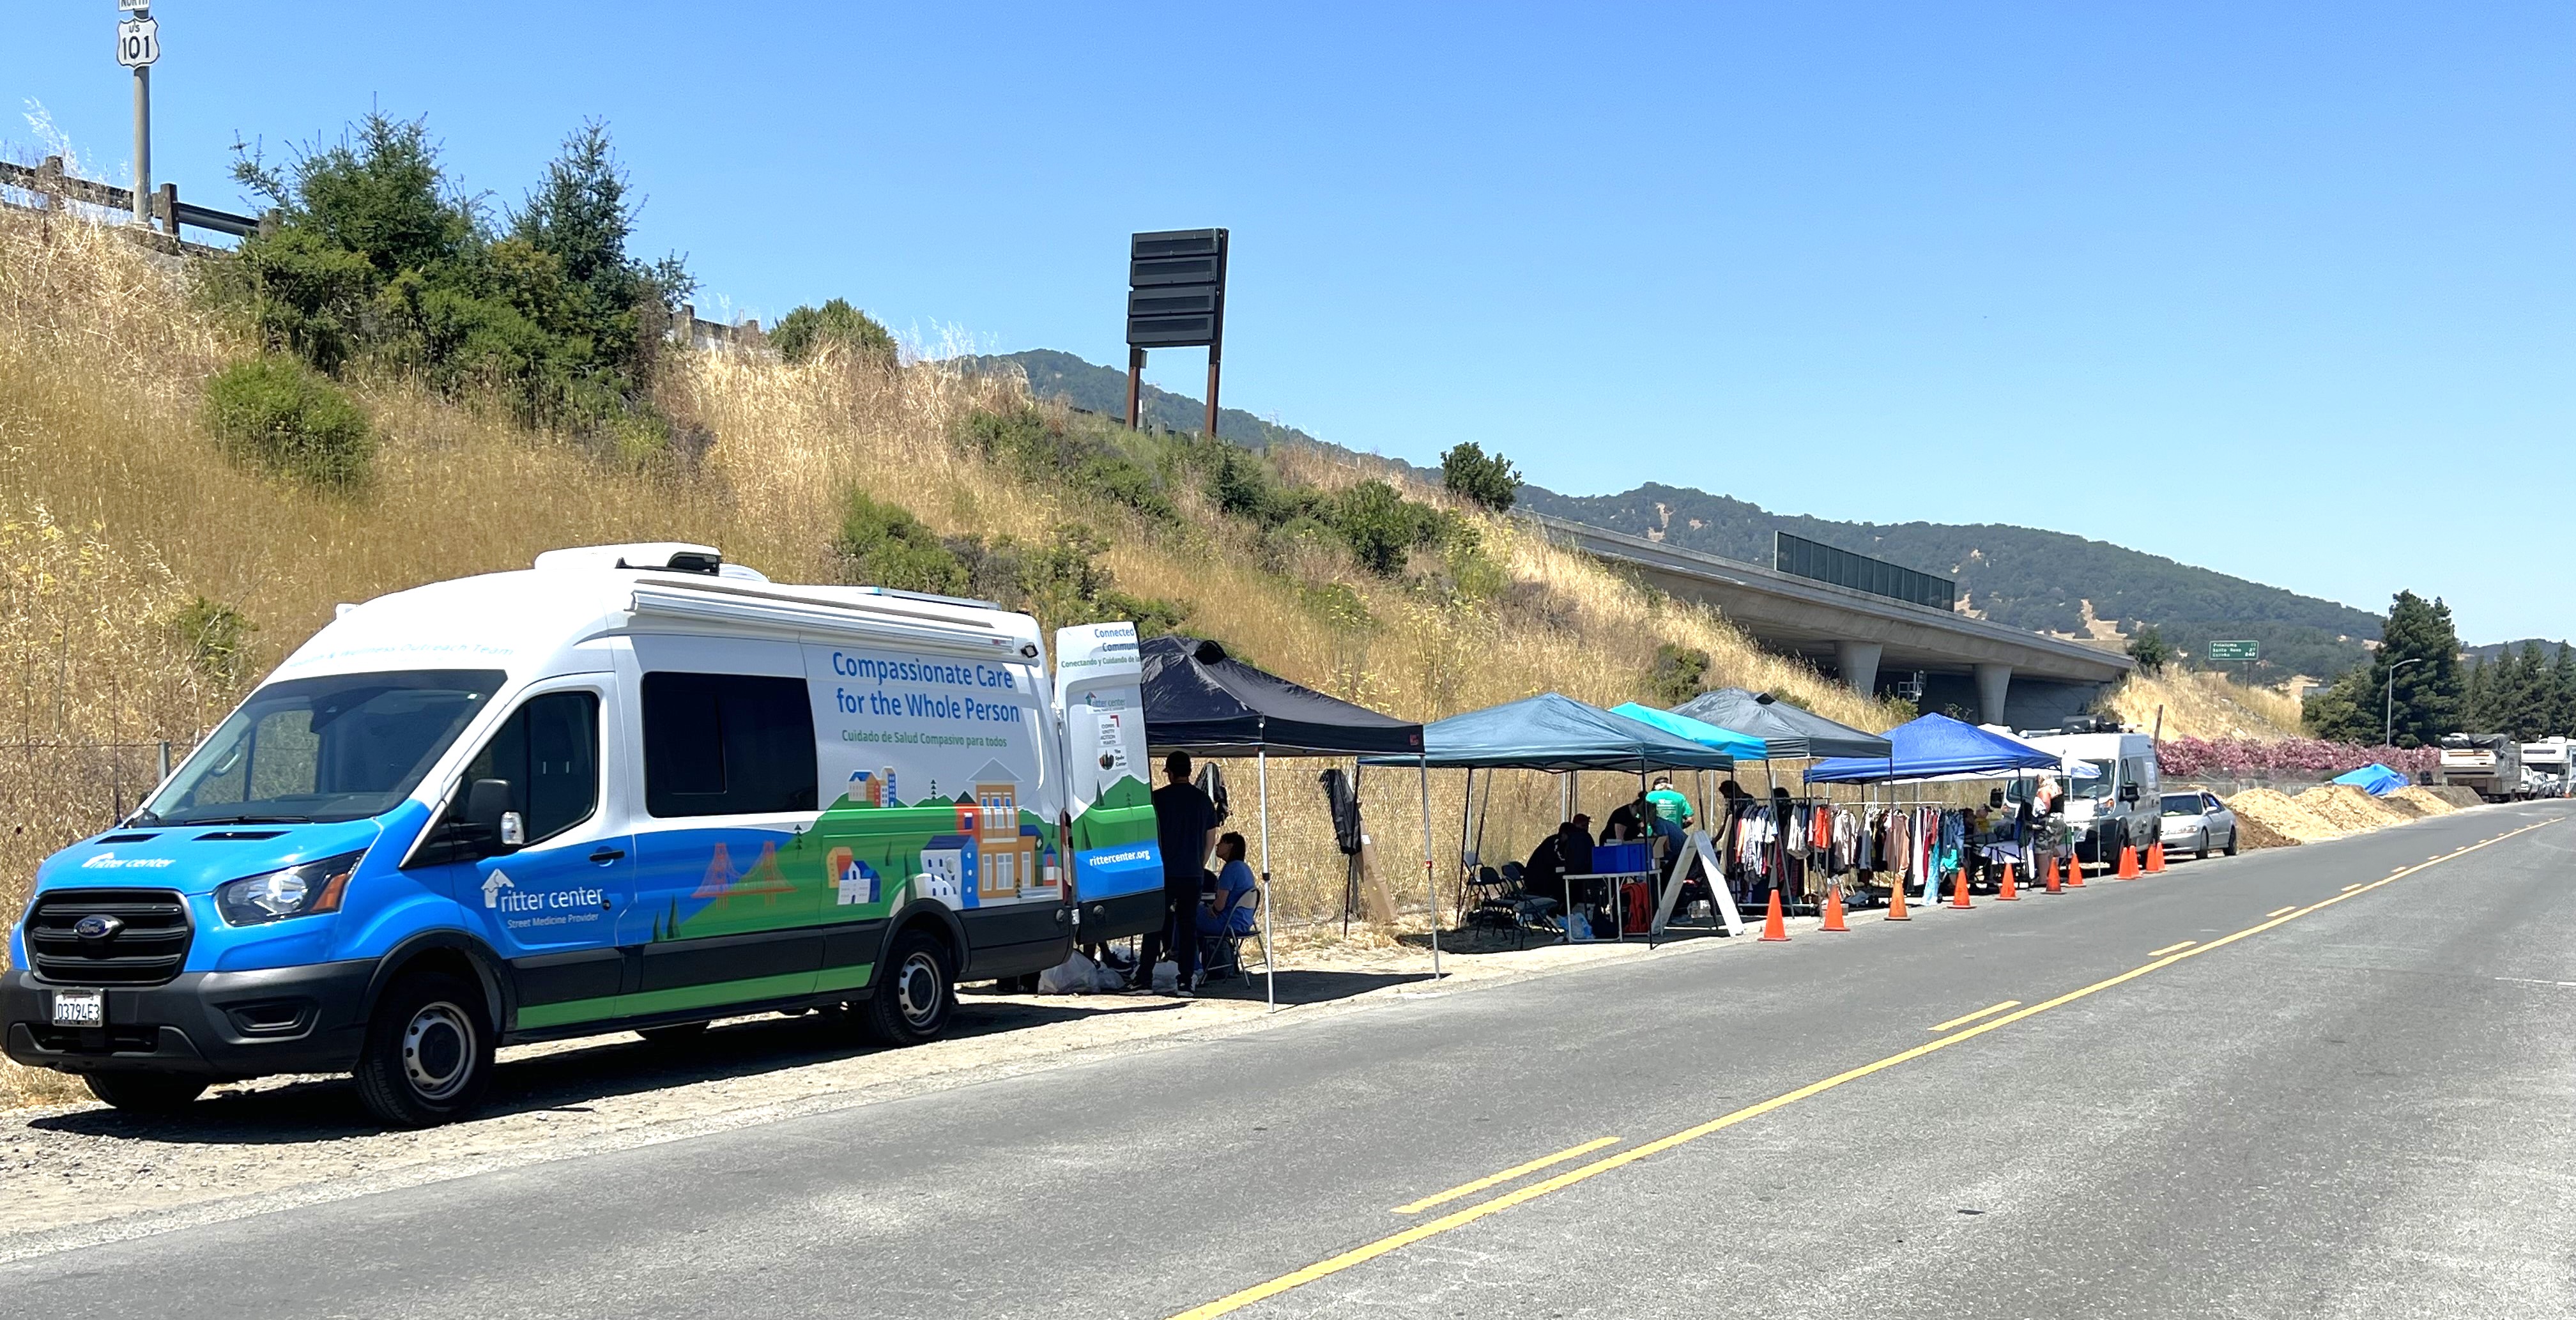 A view of Binford Road shows a van with supportive services open to assist residents as well as tents set up with resources.